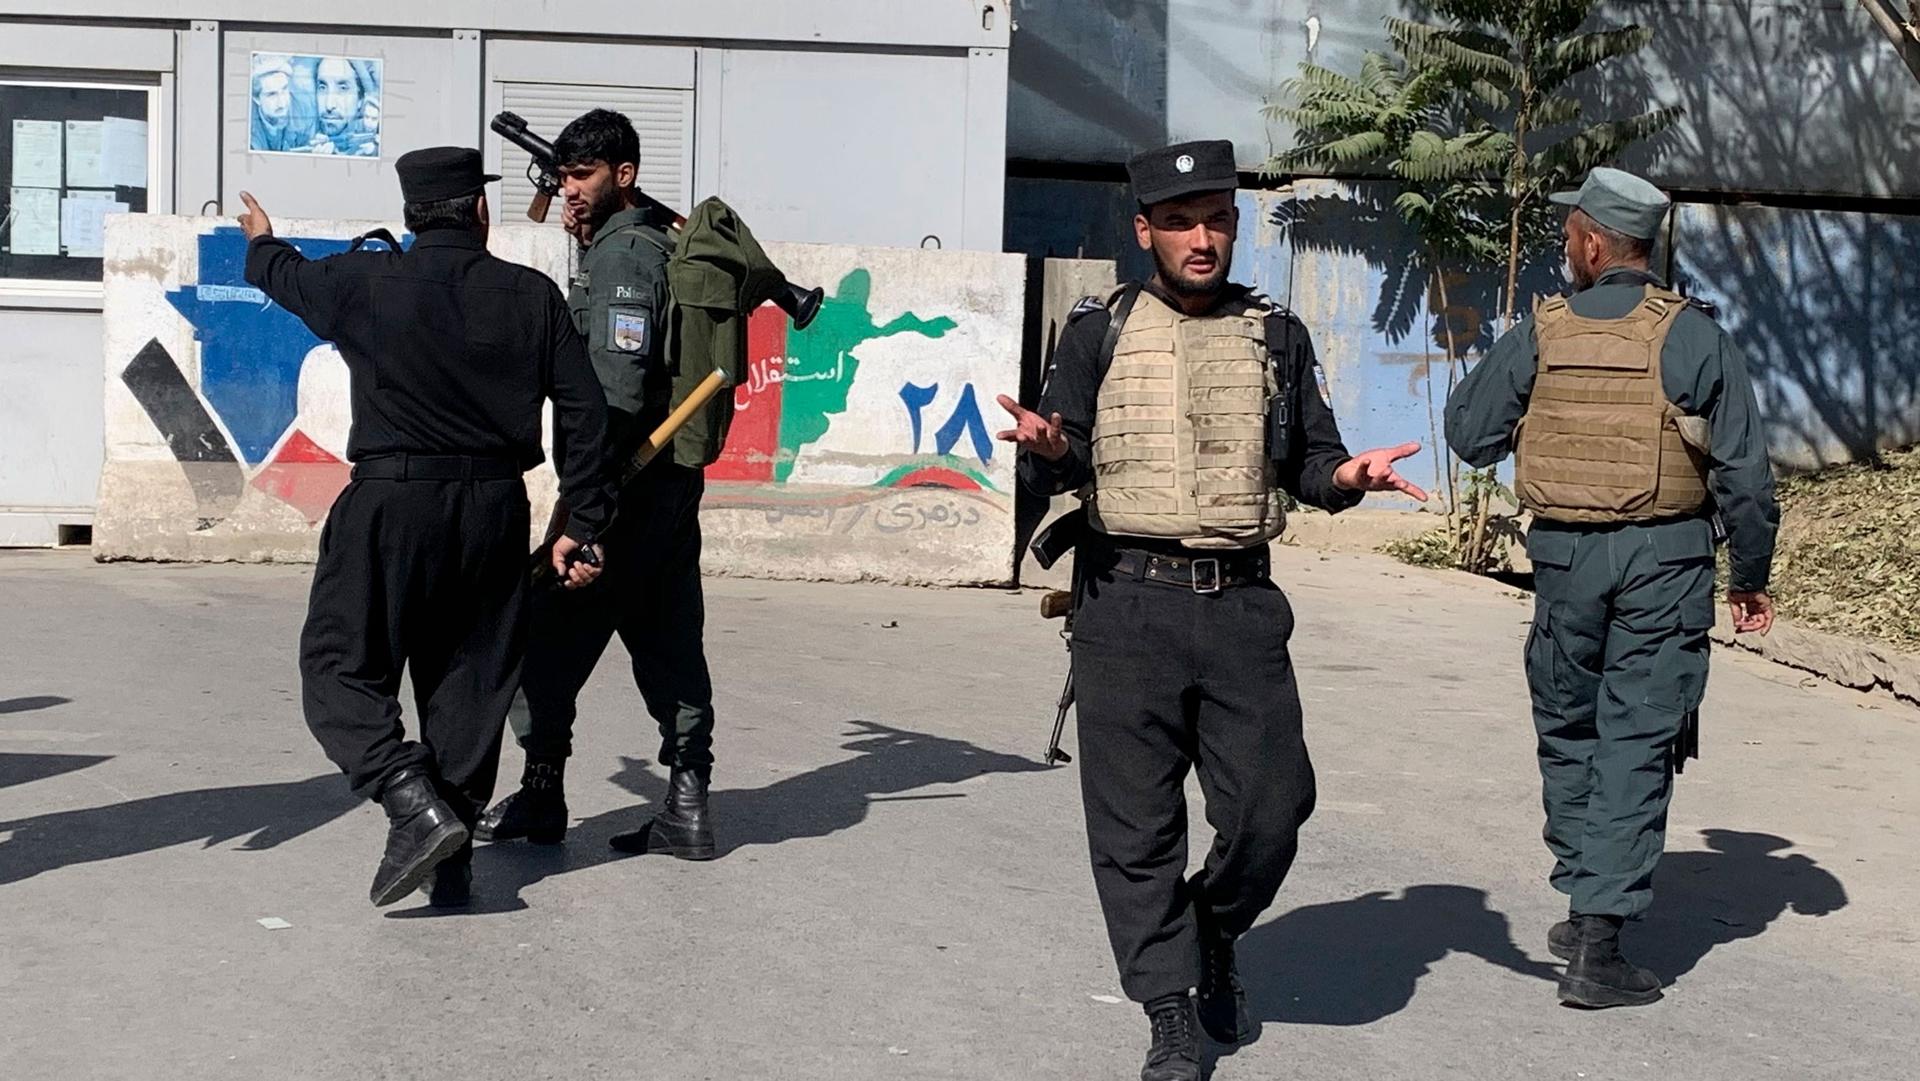 Several Afghan security officials are show wearing body armor and holding weapons.